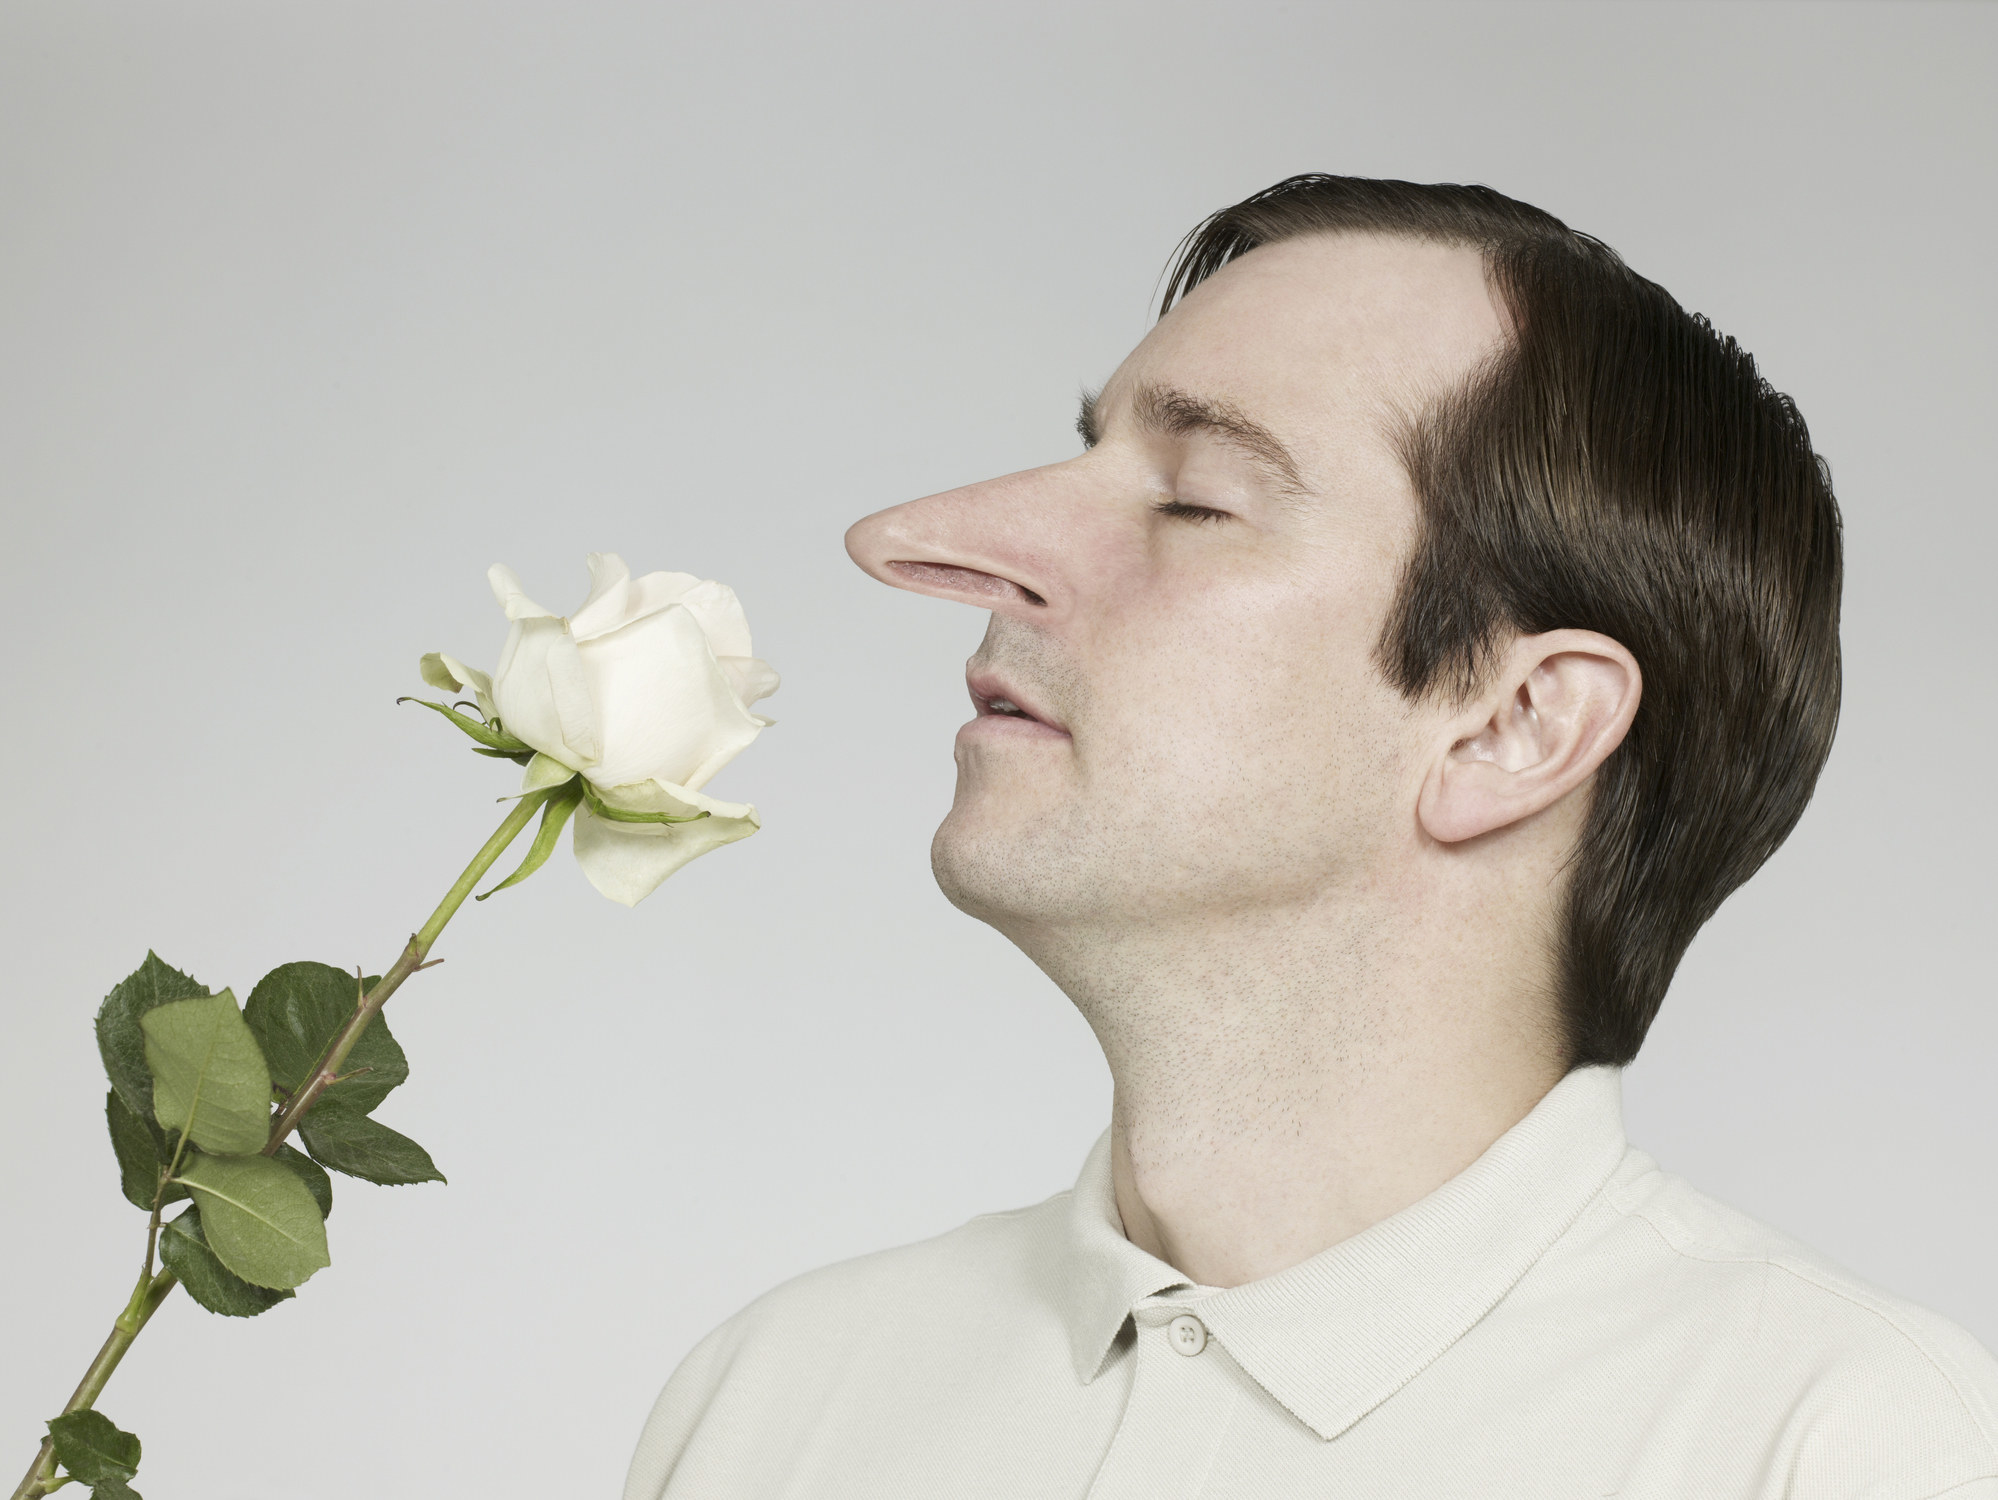 A man with a long nose smells a flower